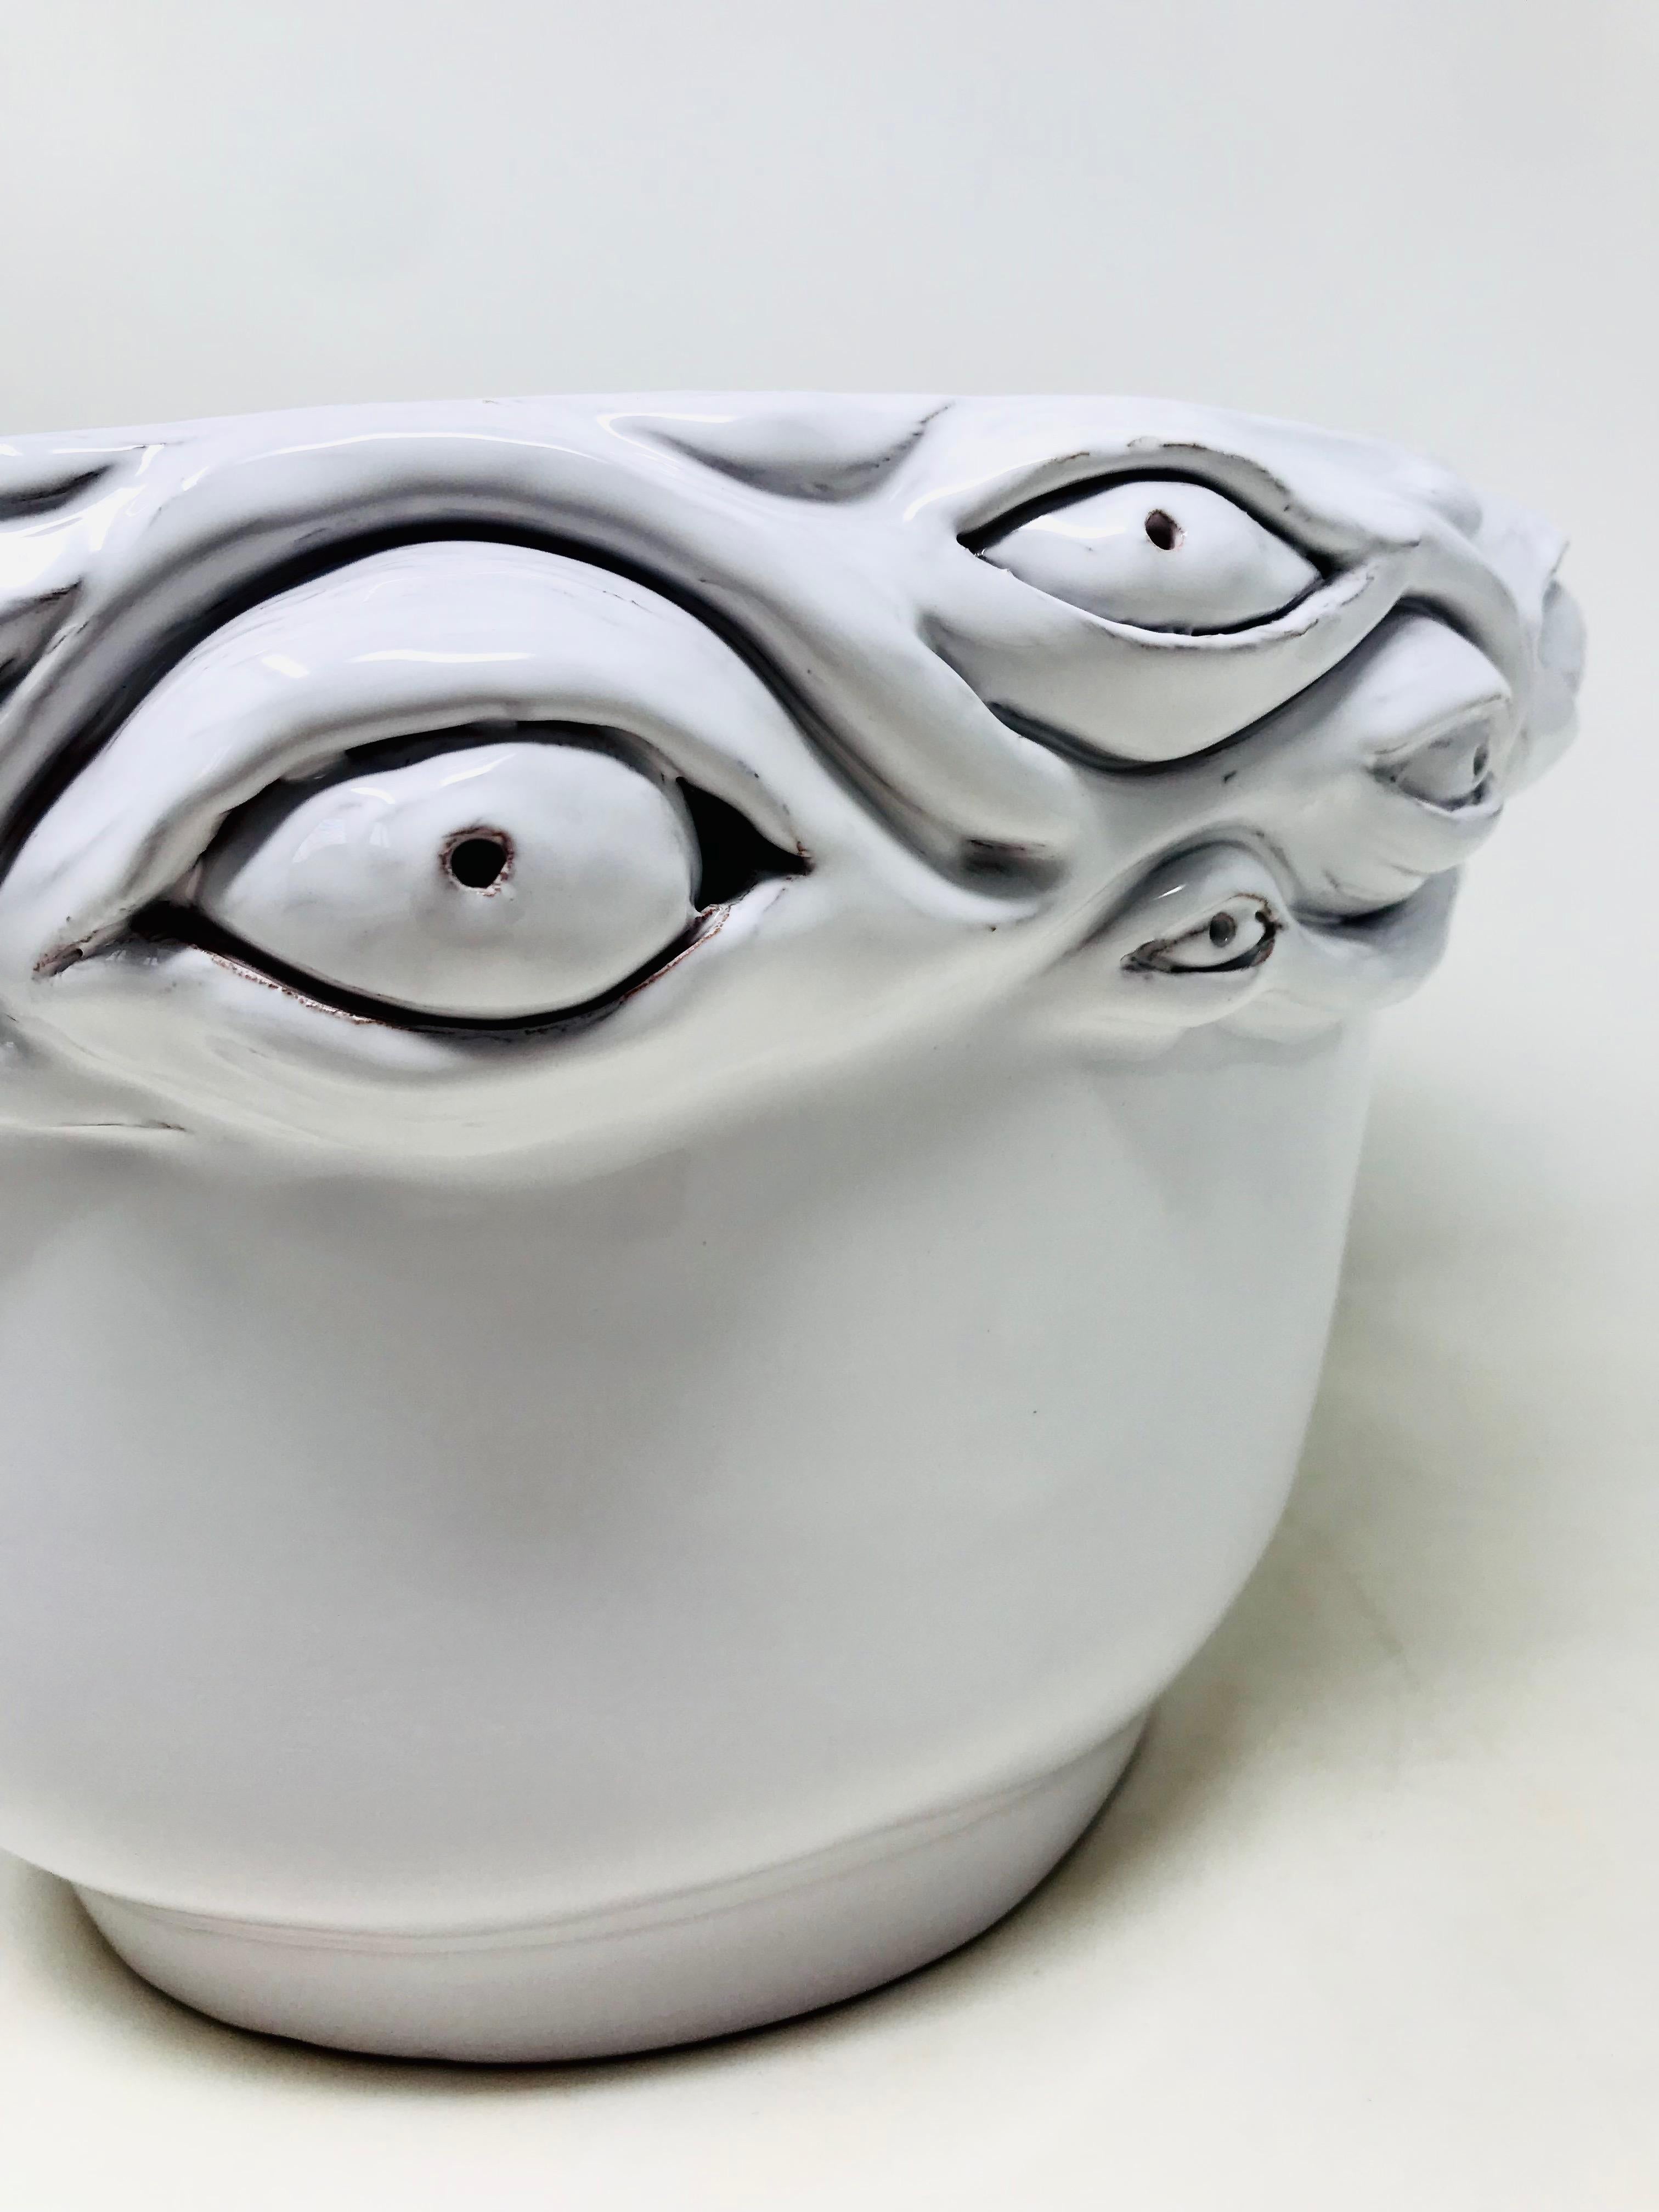 Freaklab Vase Made Entirely by Hand in Ceramic, White Color In New Condition For Sale In Modica, RG